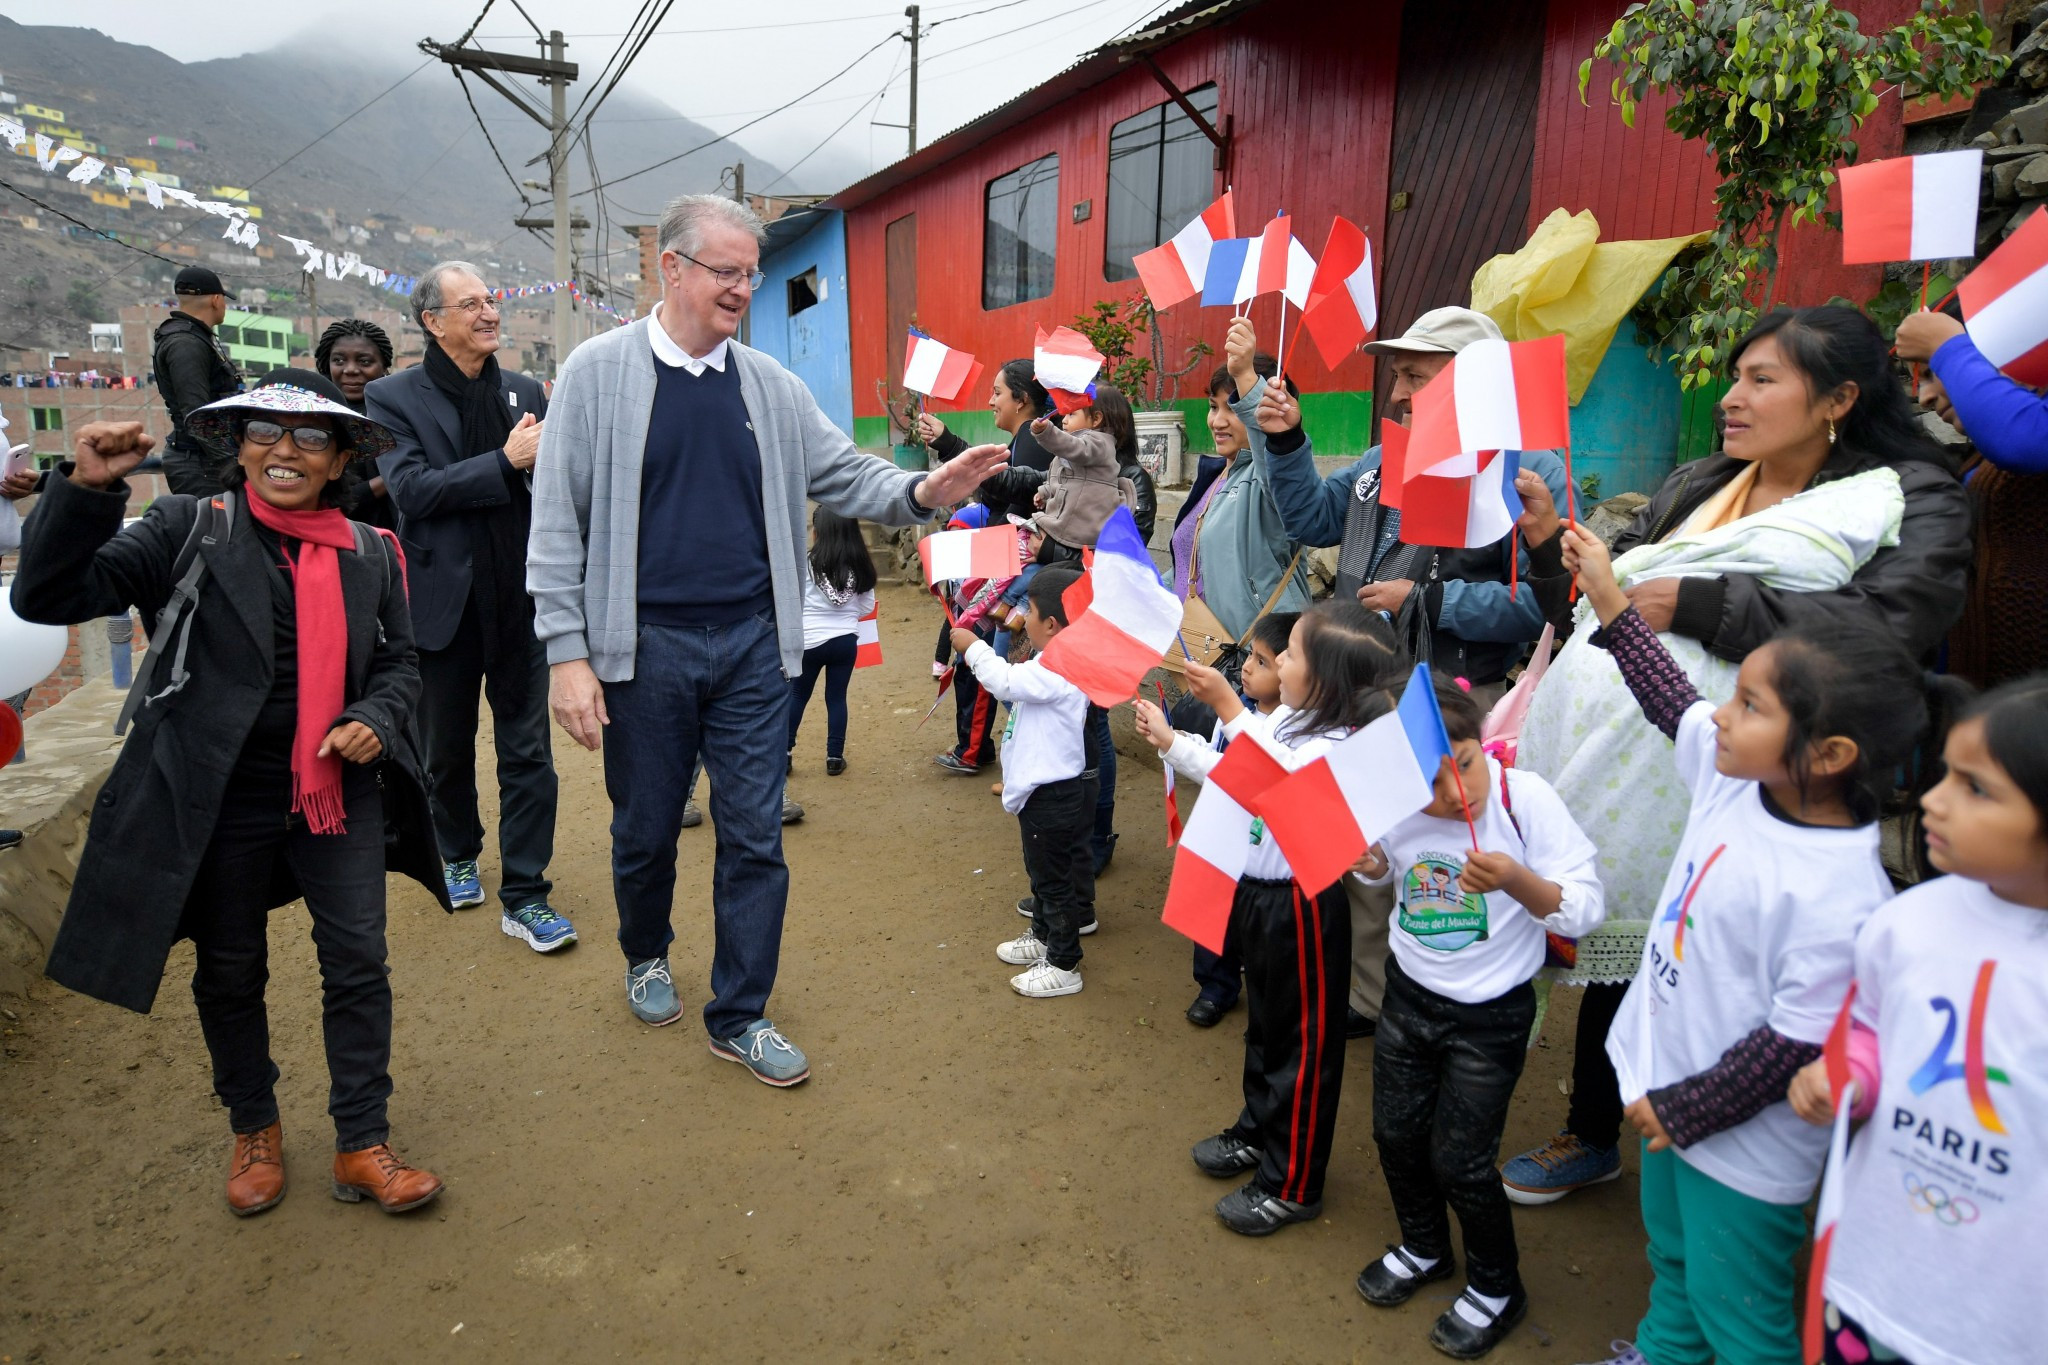 Paris 2024 pledge to continue supporting projects worldwide after visiting Lima initiative 